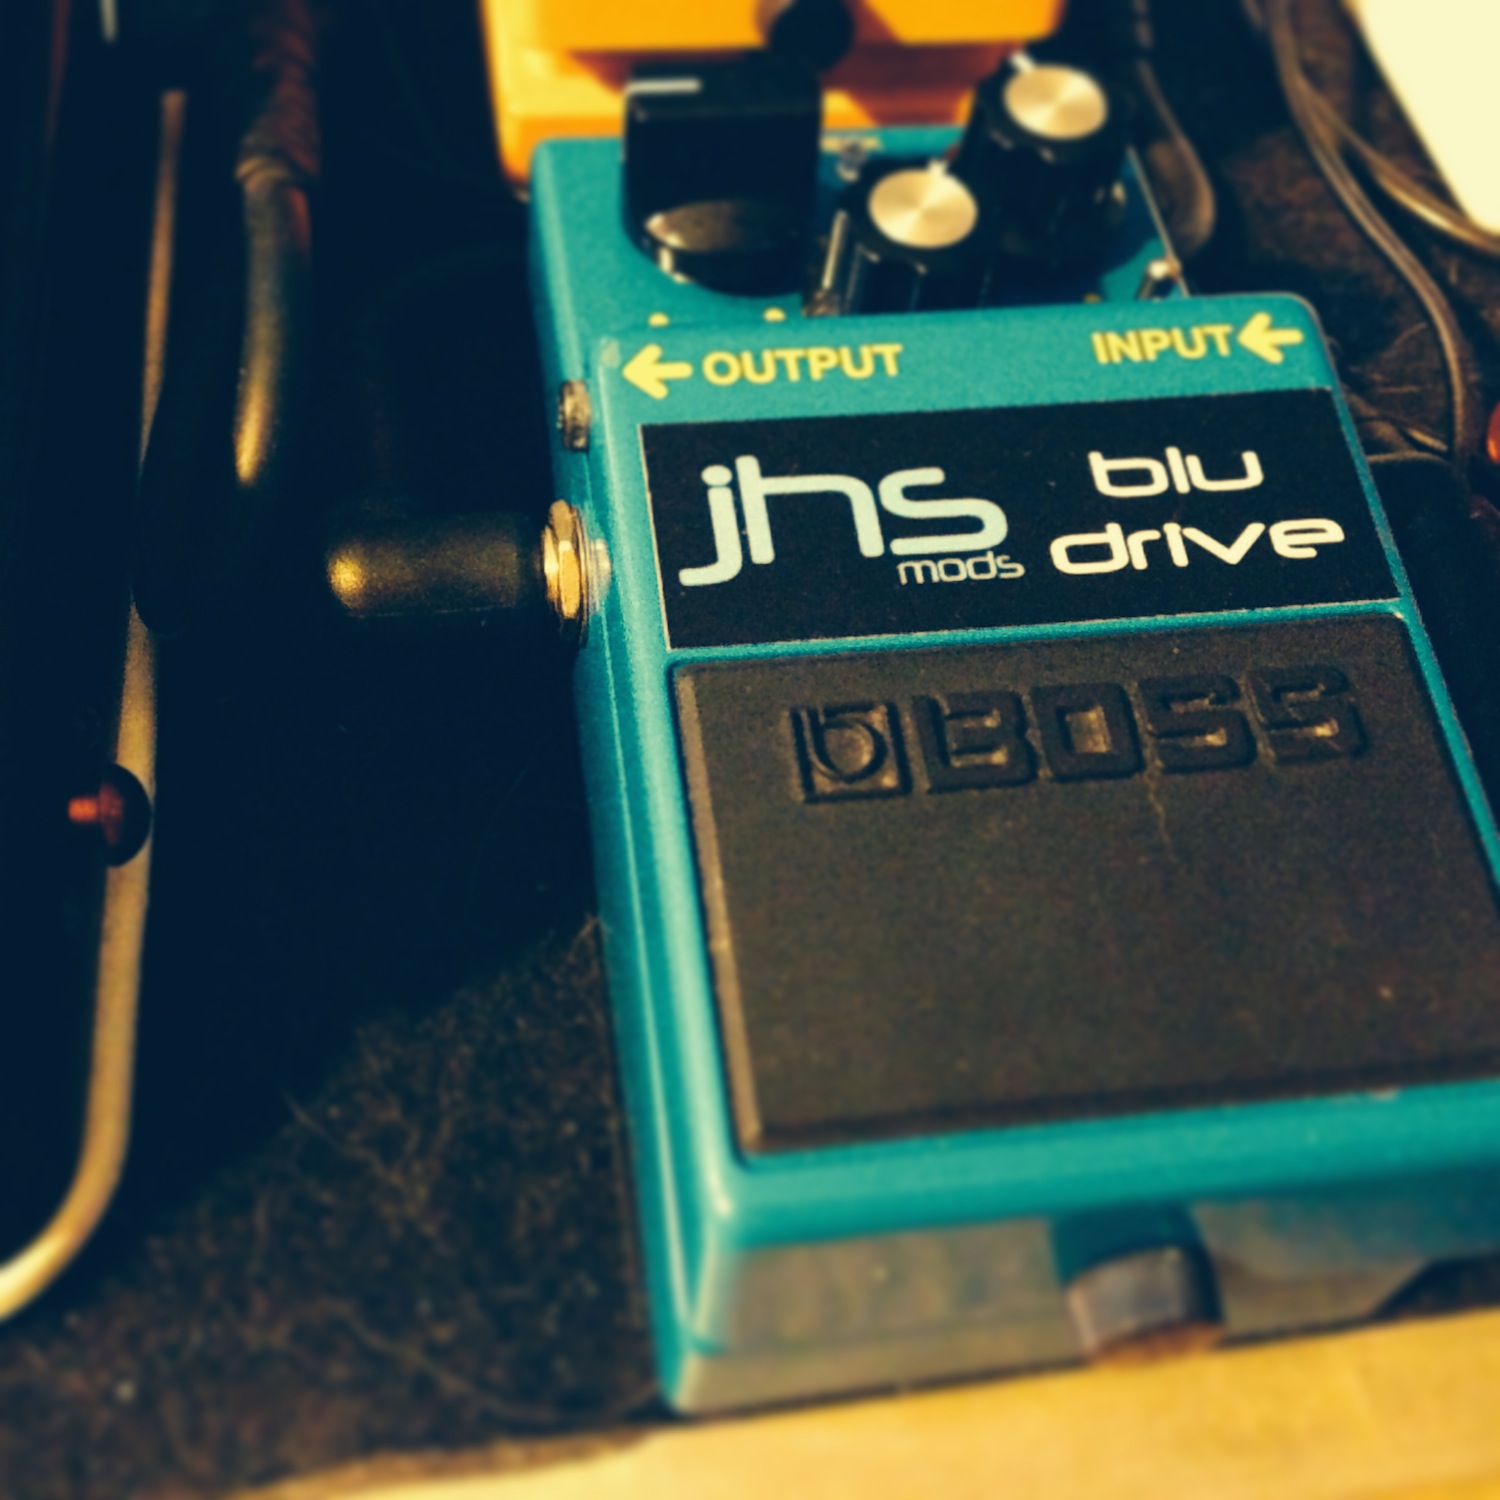 Boss BD-2 Blues Driver (JHS Pedals Blu-Drive mod) - Pedal of the Day